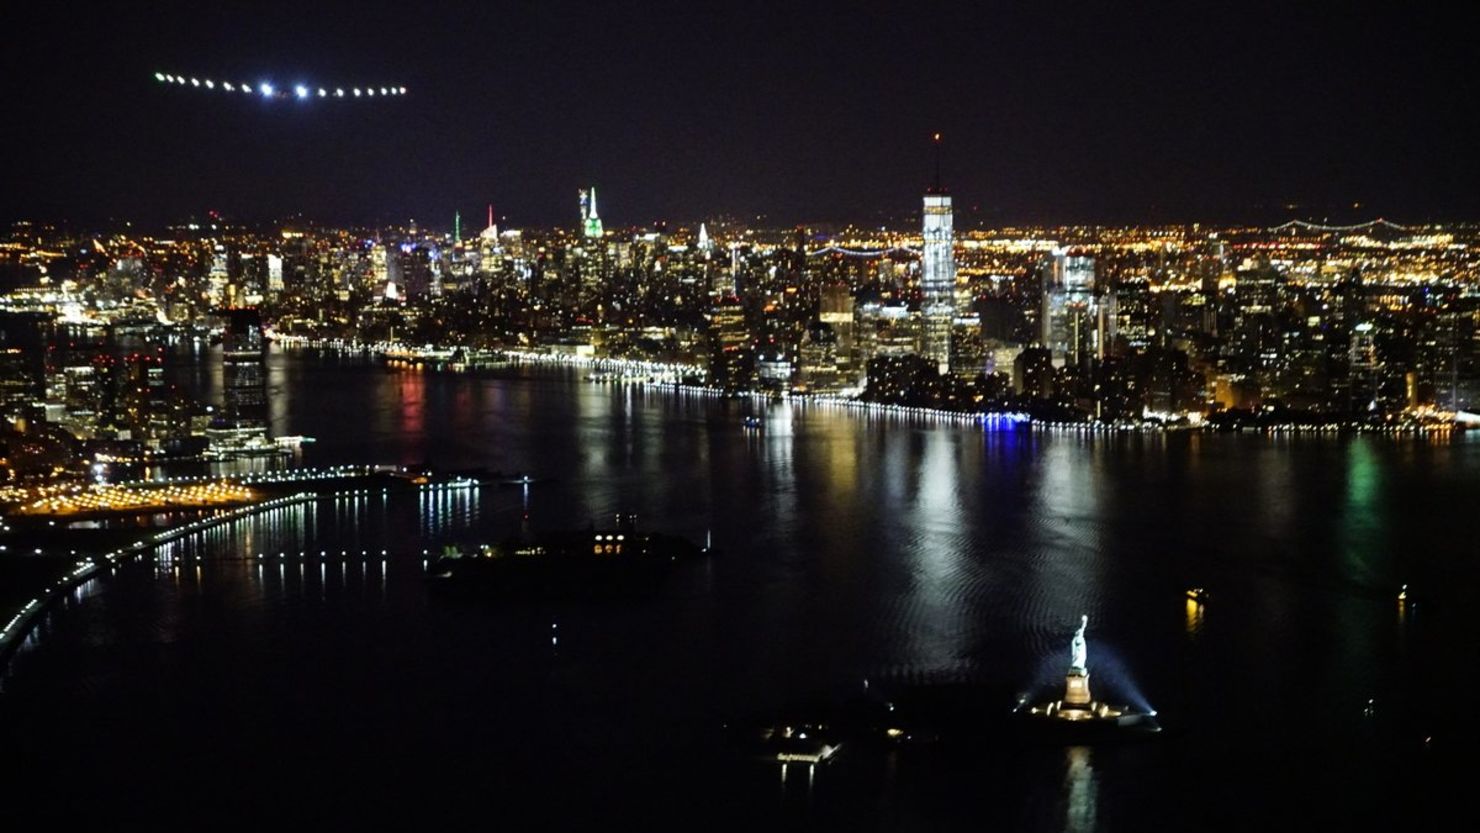 Solar Impulse 2 flies above New York City and the Statue of Liberty.